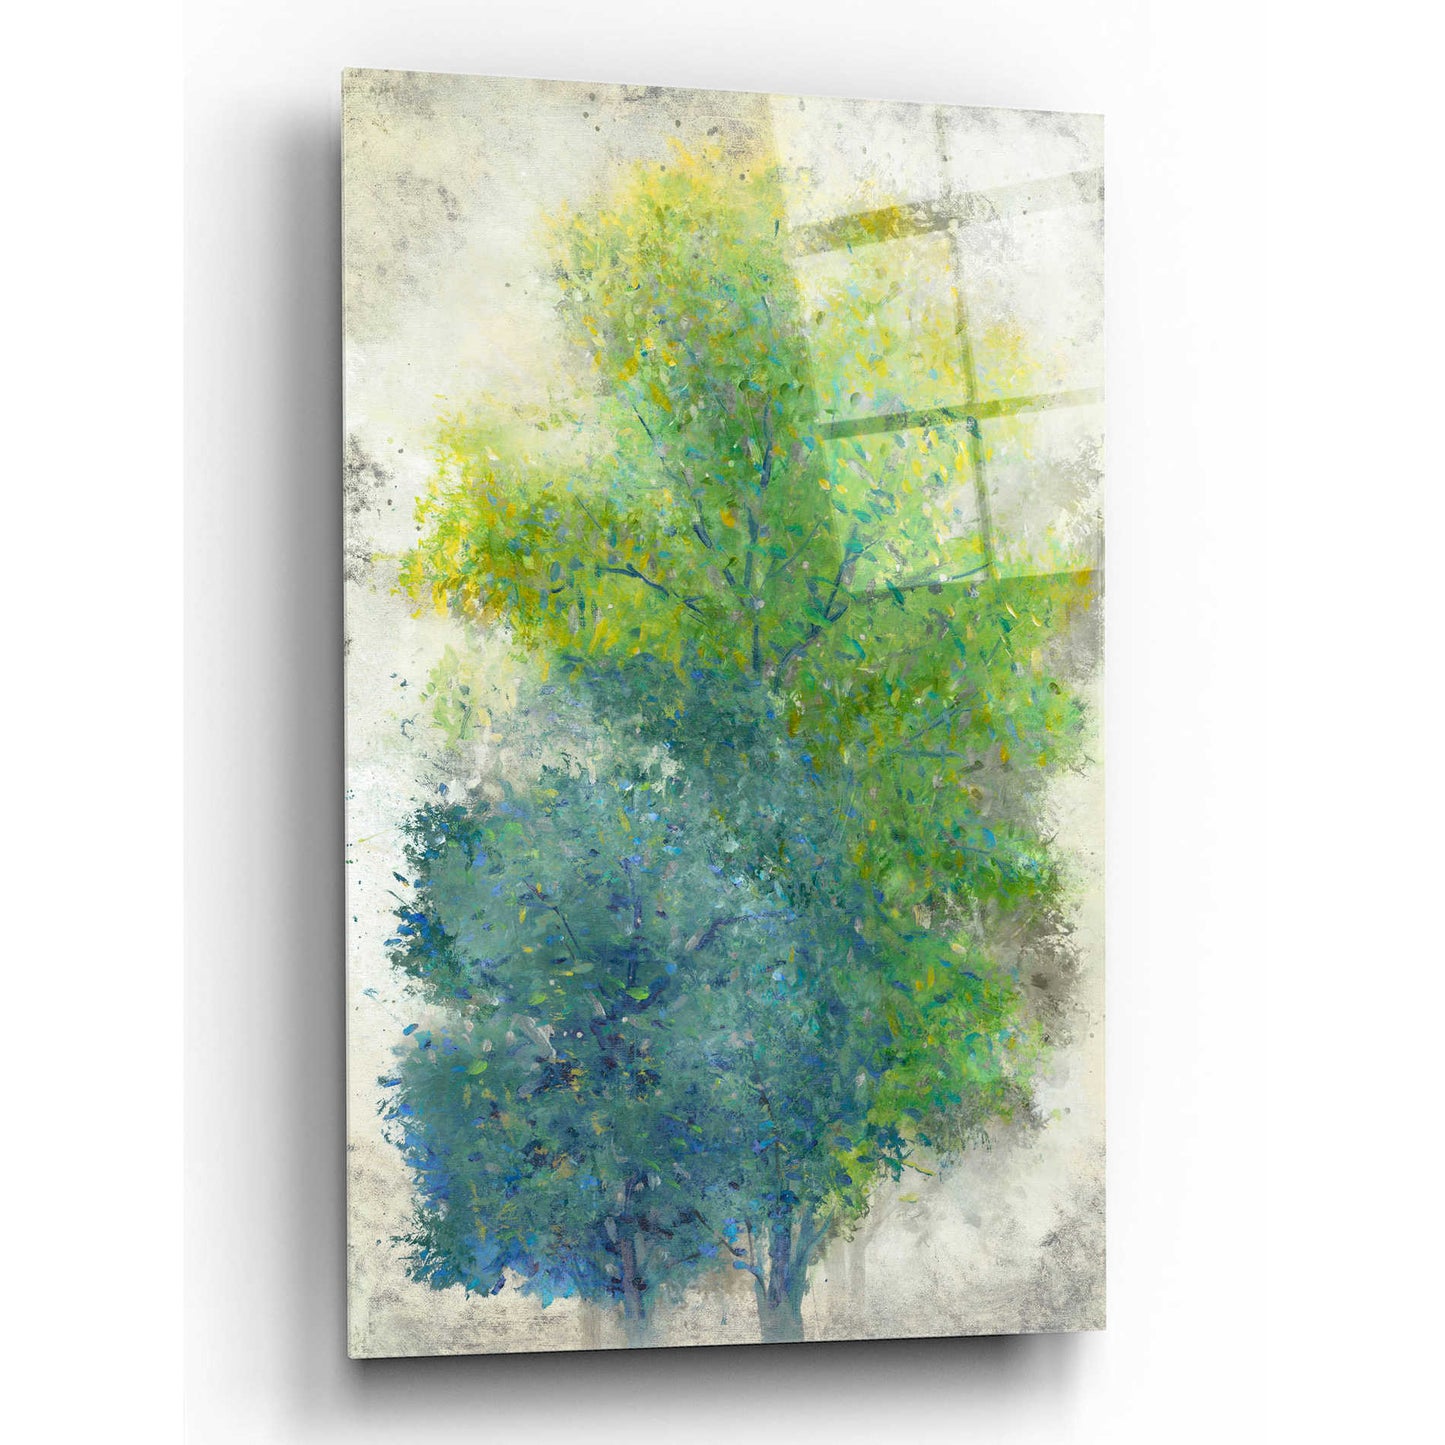 Epic Art 'A Pair of Trees II' by Tim O'Toole, Acrylic Glass Wall Art,12x16